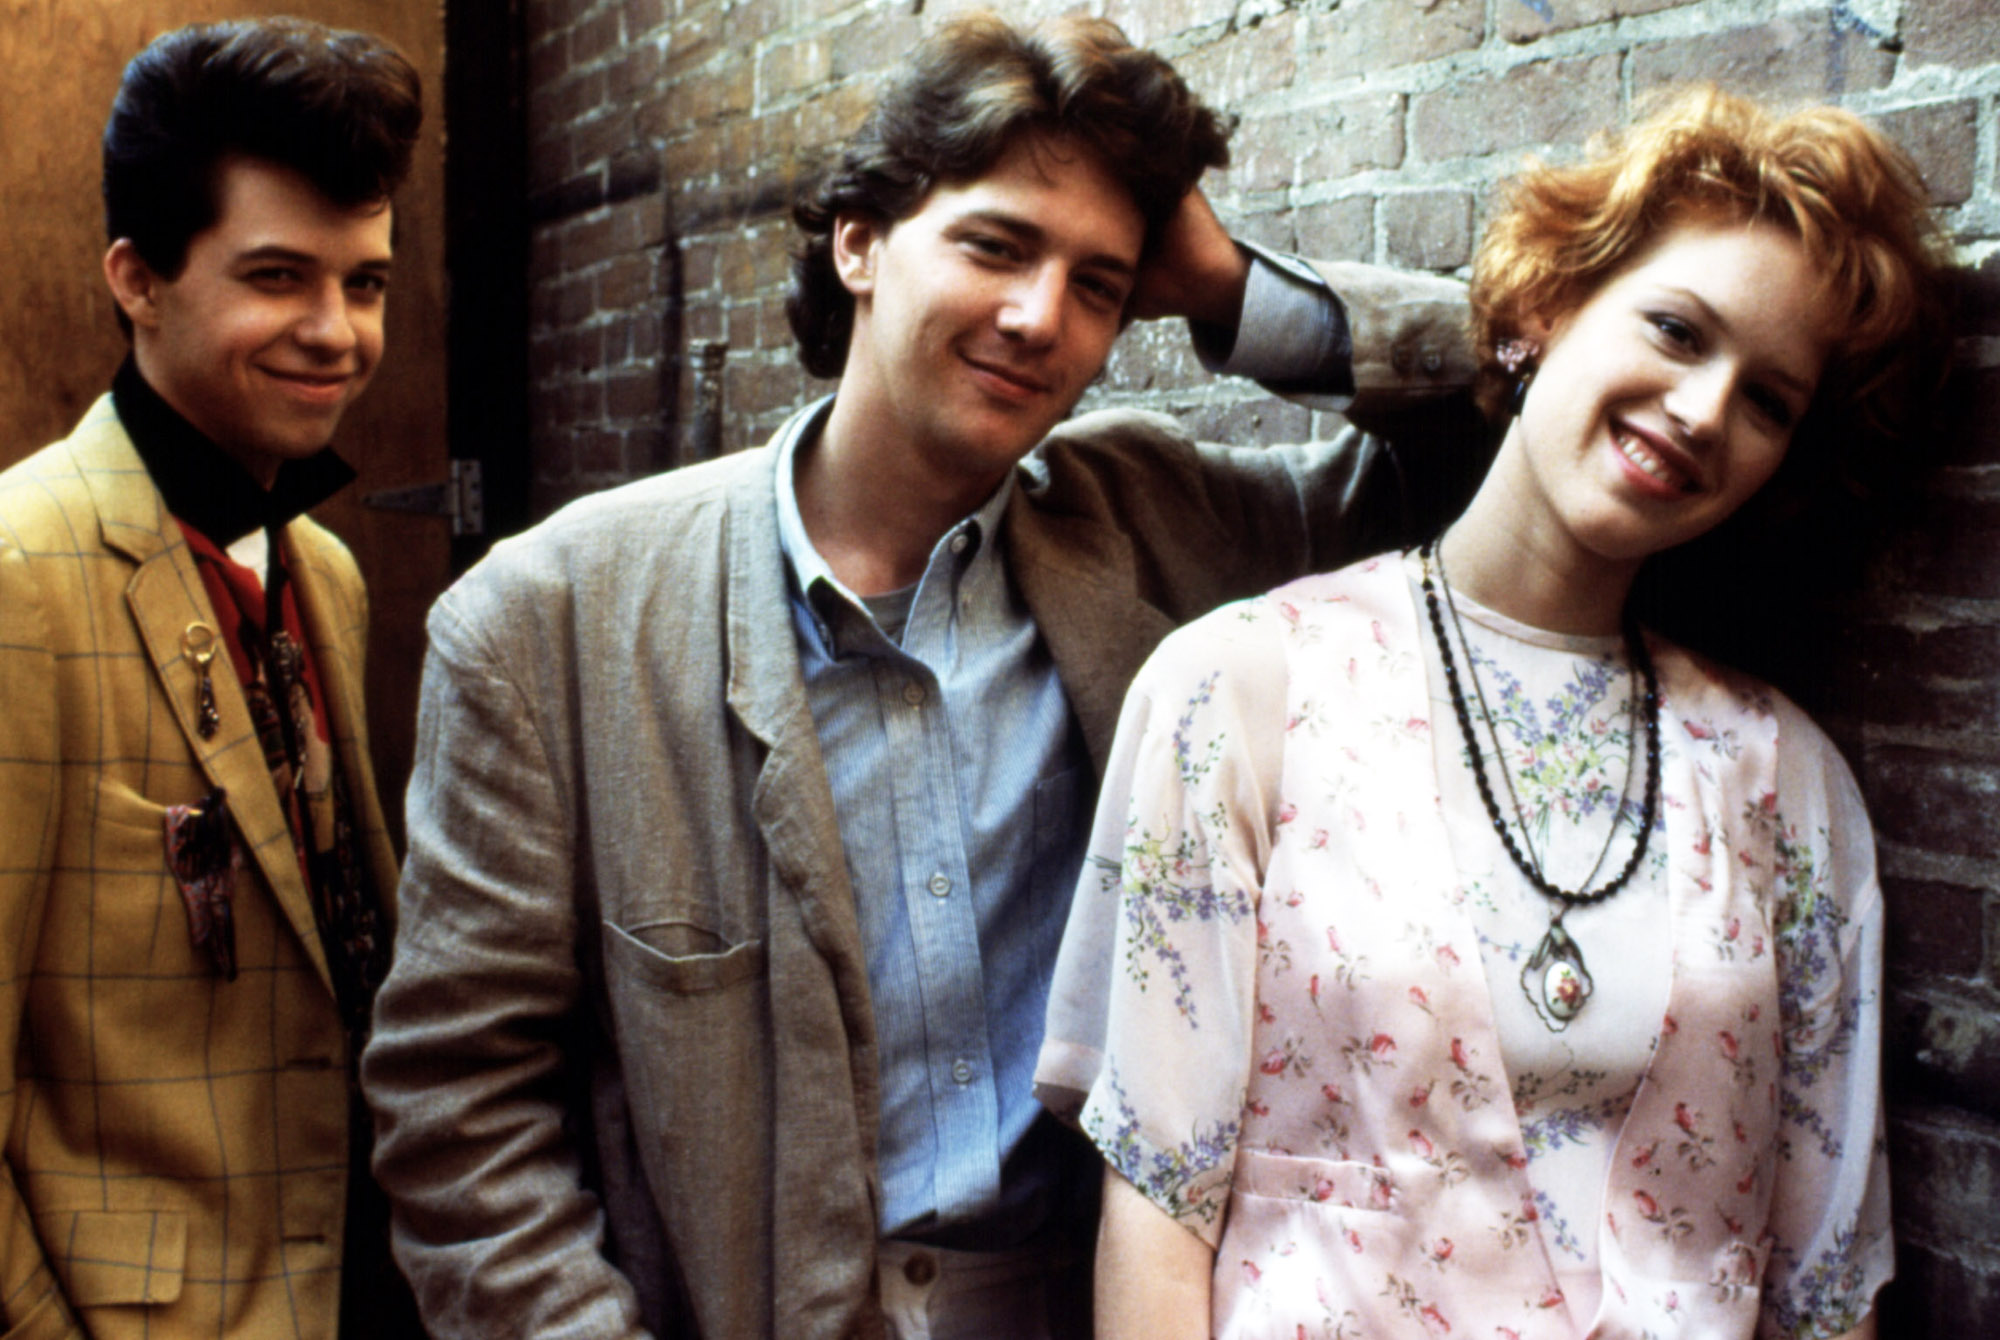 Pretty in Pink” Turns 30: Best Moments from the Film | The Campus Crop